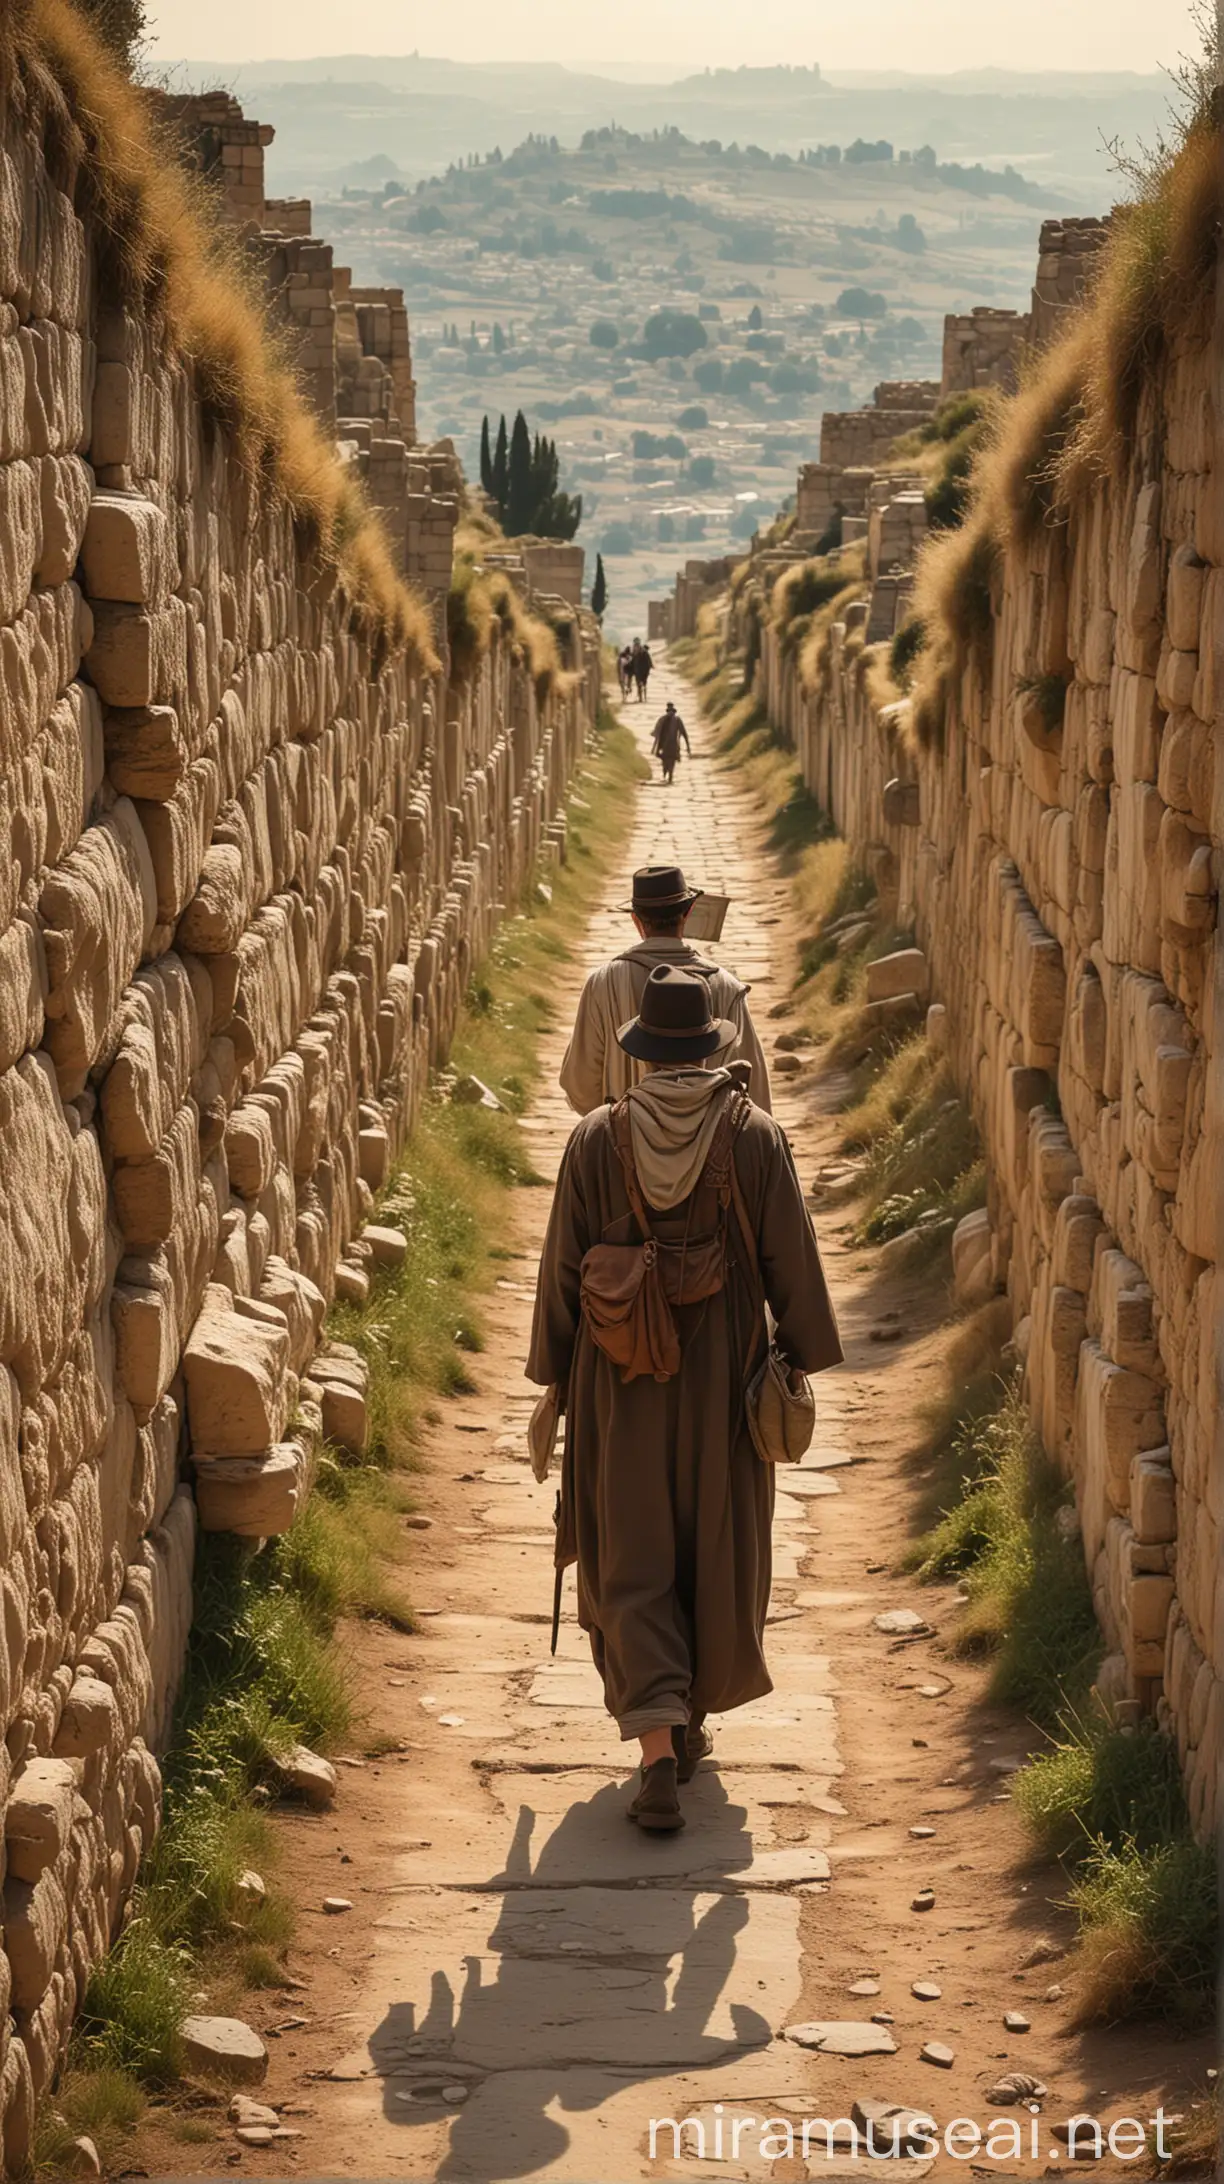 A Jewish travelers walking on a tight road in ancient world